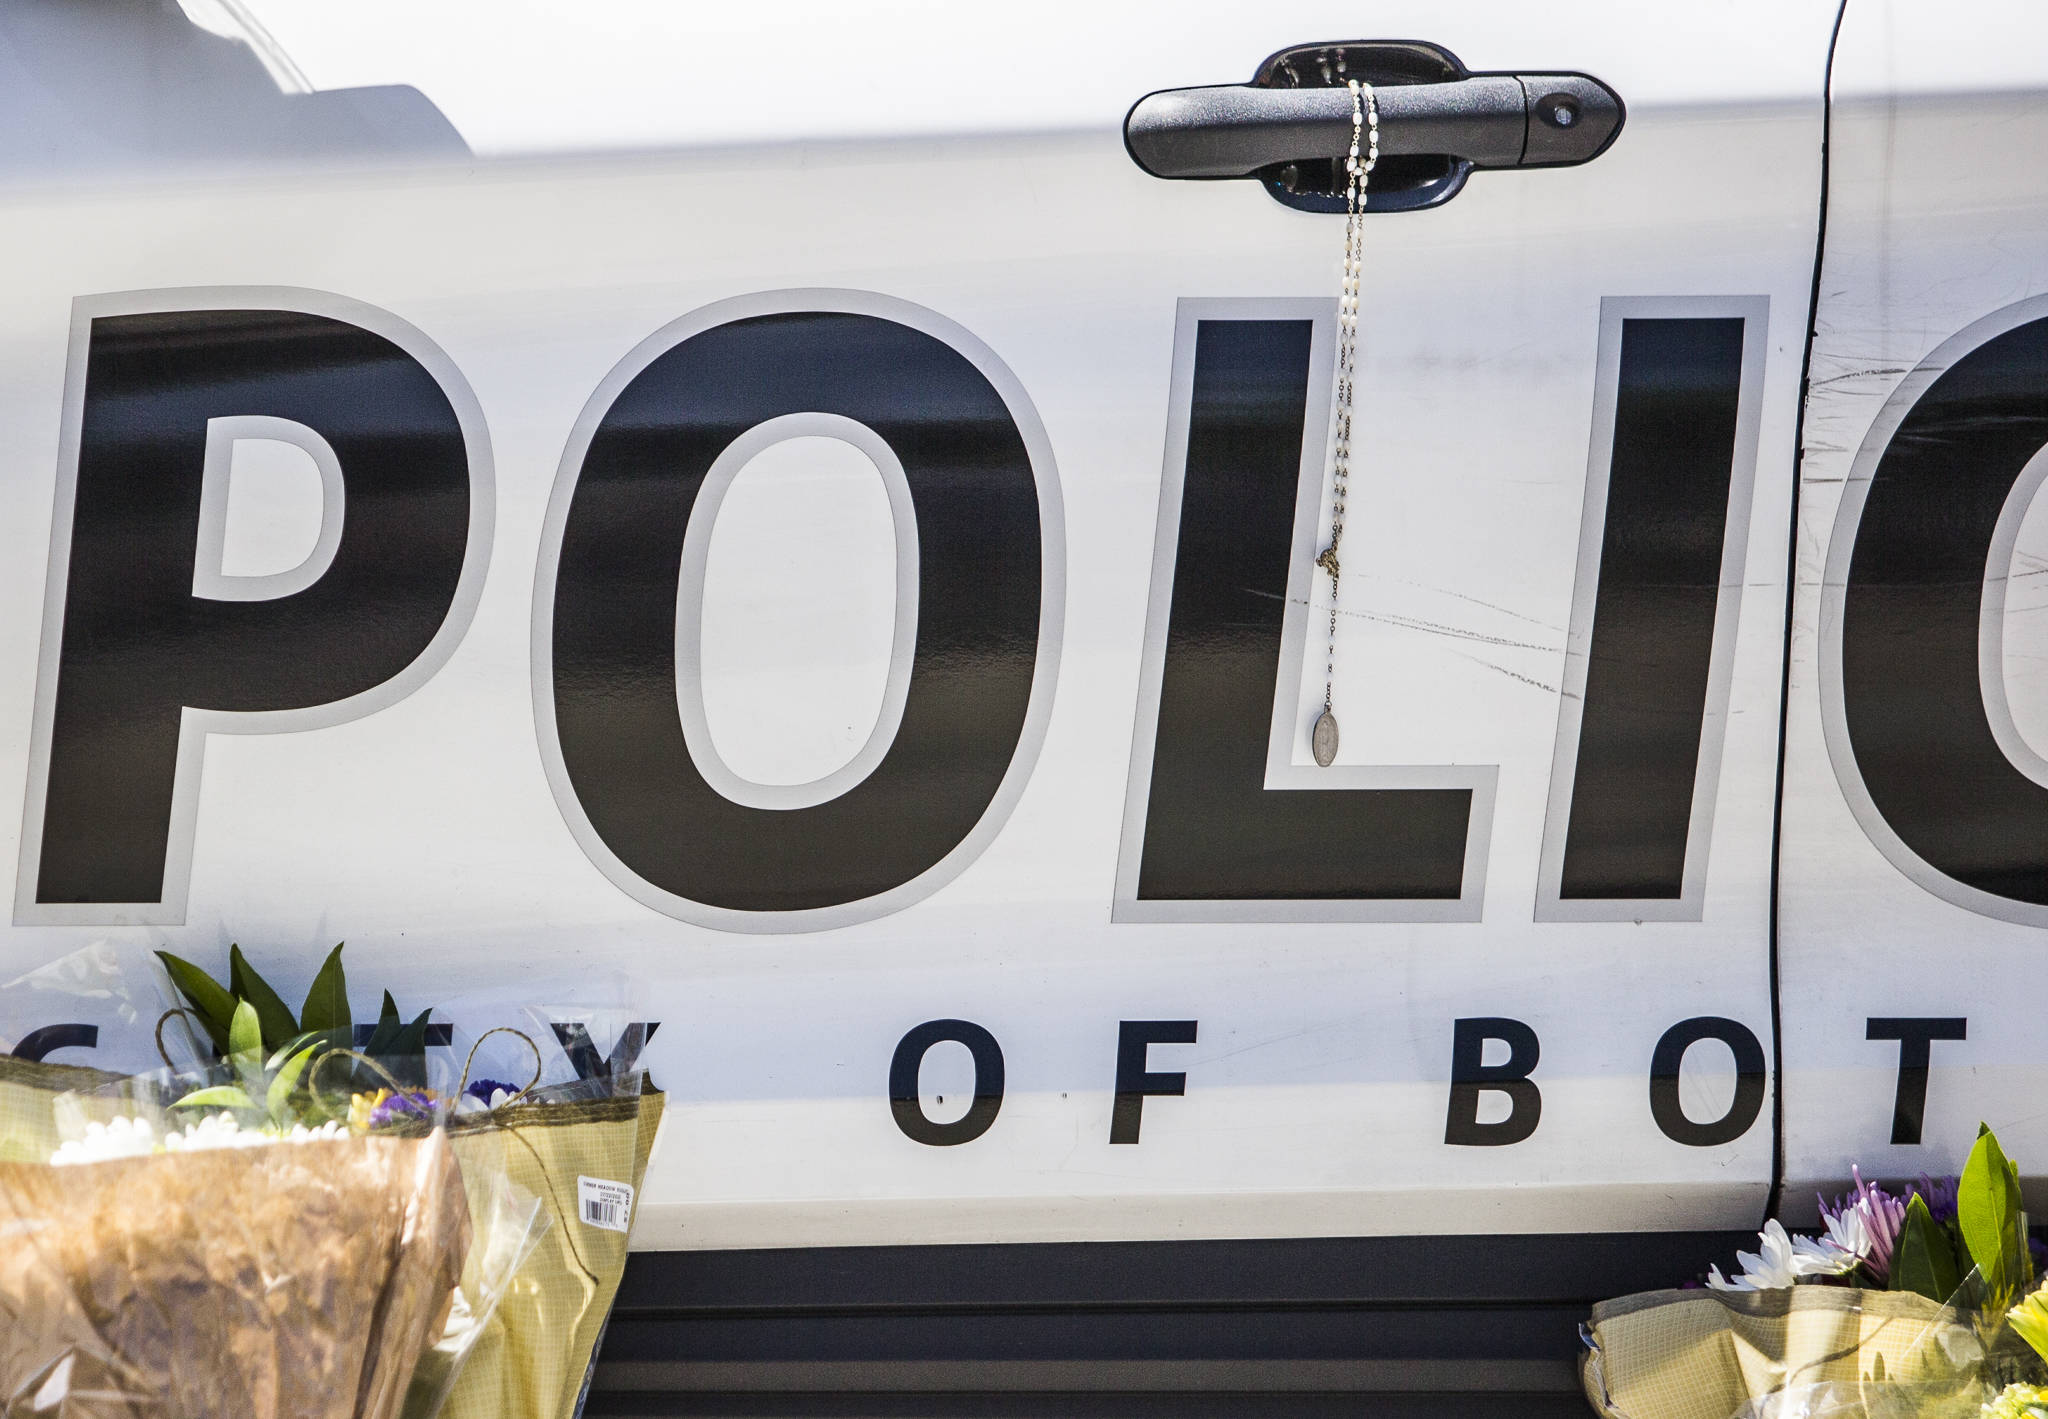 A rosary hangs from a Bothell Police Department vehicle door handle on Tuesday in Bothell. (Olivia Vanni / The Herald)